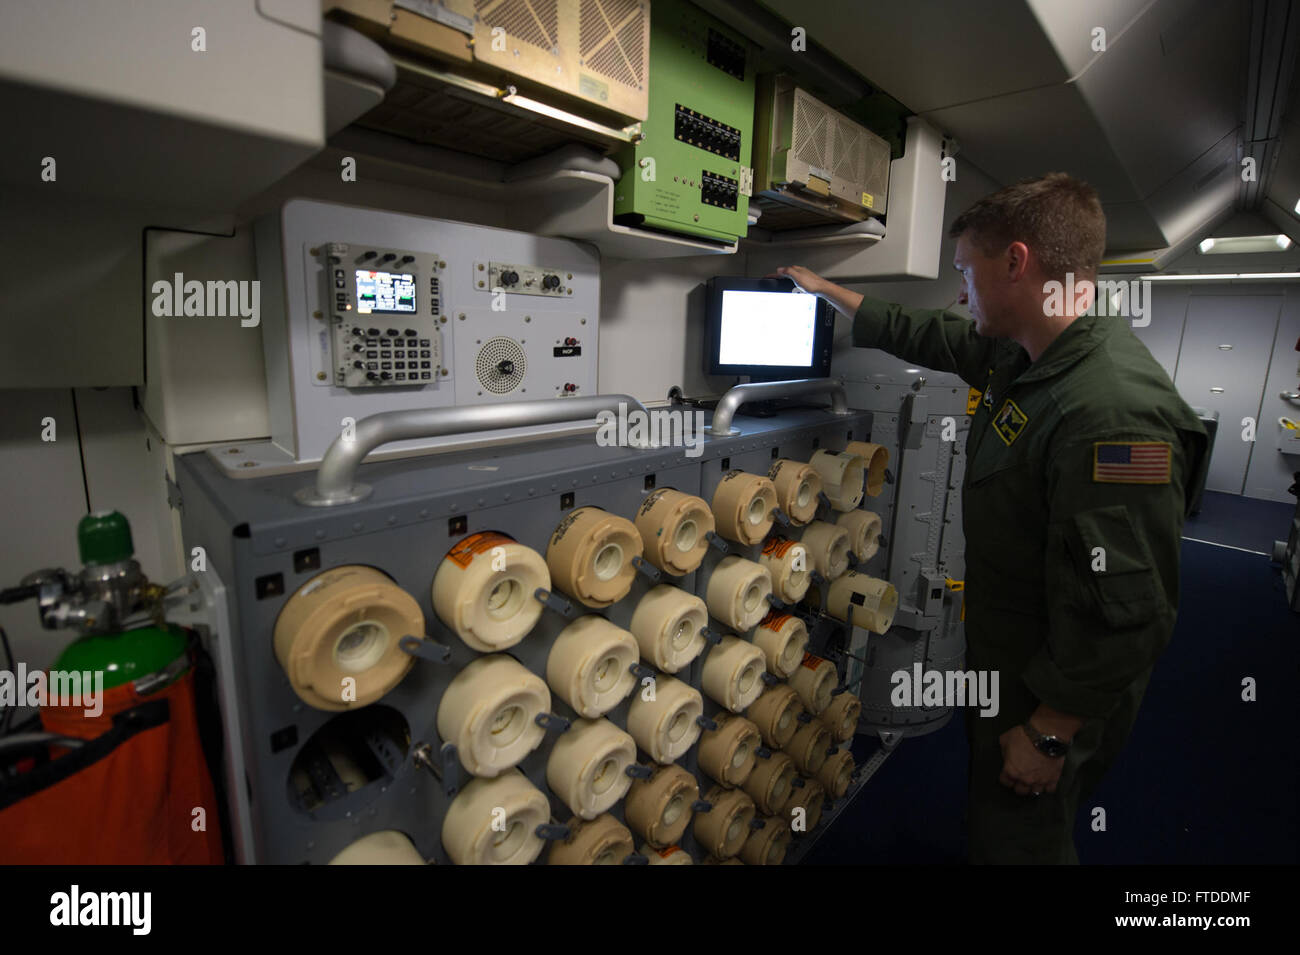 Sonobuoys are stored in a Boeing P-8 Poseidon maritime surveillance aircraft during a BALTOPS 2015 mission over the Baltic Sea June 13, 2015. The U.S. Navy deploys sonobuoys from the Boeing P-8 Poseidon, the sonobouystransmit sound waves through the water upon impact, reporting underwater activity. Approximately 5,600 ground, maritime and air personnel from participating nations will demonstrate air defense, maritime interdiction, anti-subsurface warfare and amphibious operations in a joint environment to ensure regional security. (U.S. Air Force photo by Staff Sgt. Christopher Ruano/Released) Stock Photo